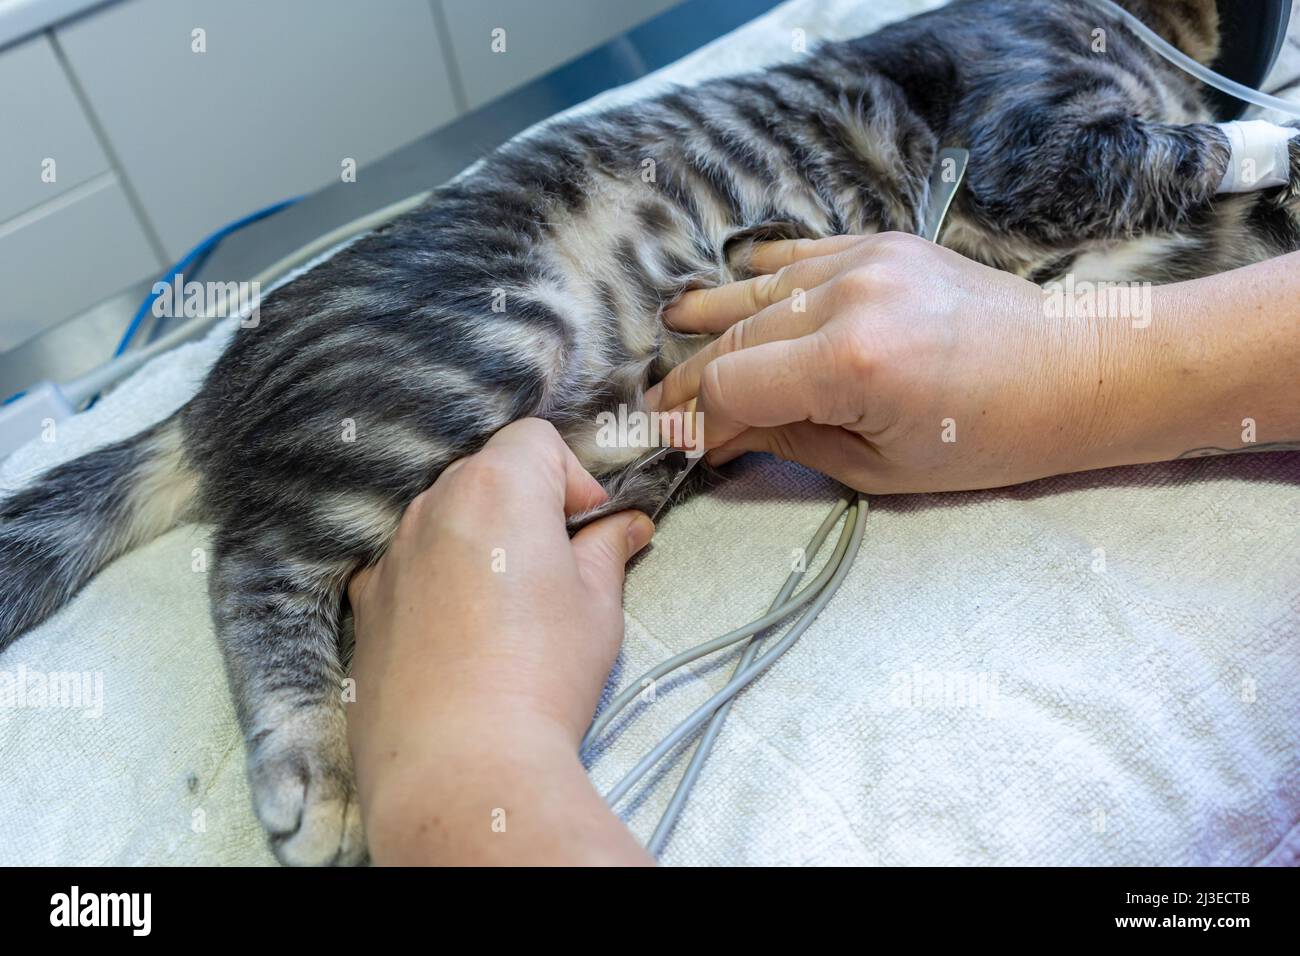 Veterinary nurse placing electrocardiography clamps in a sedated cat Stock Photo